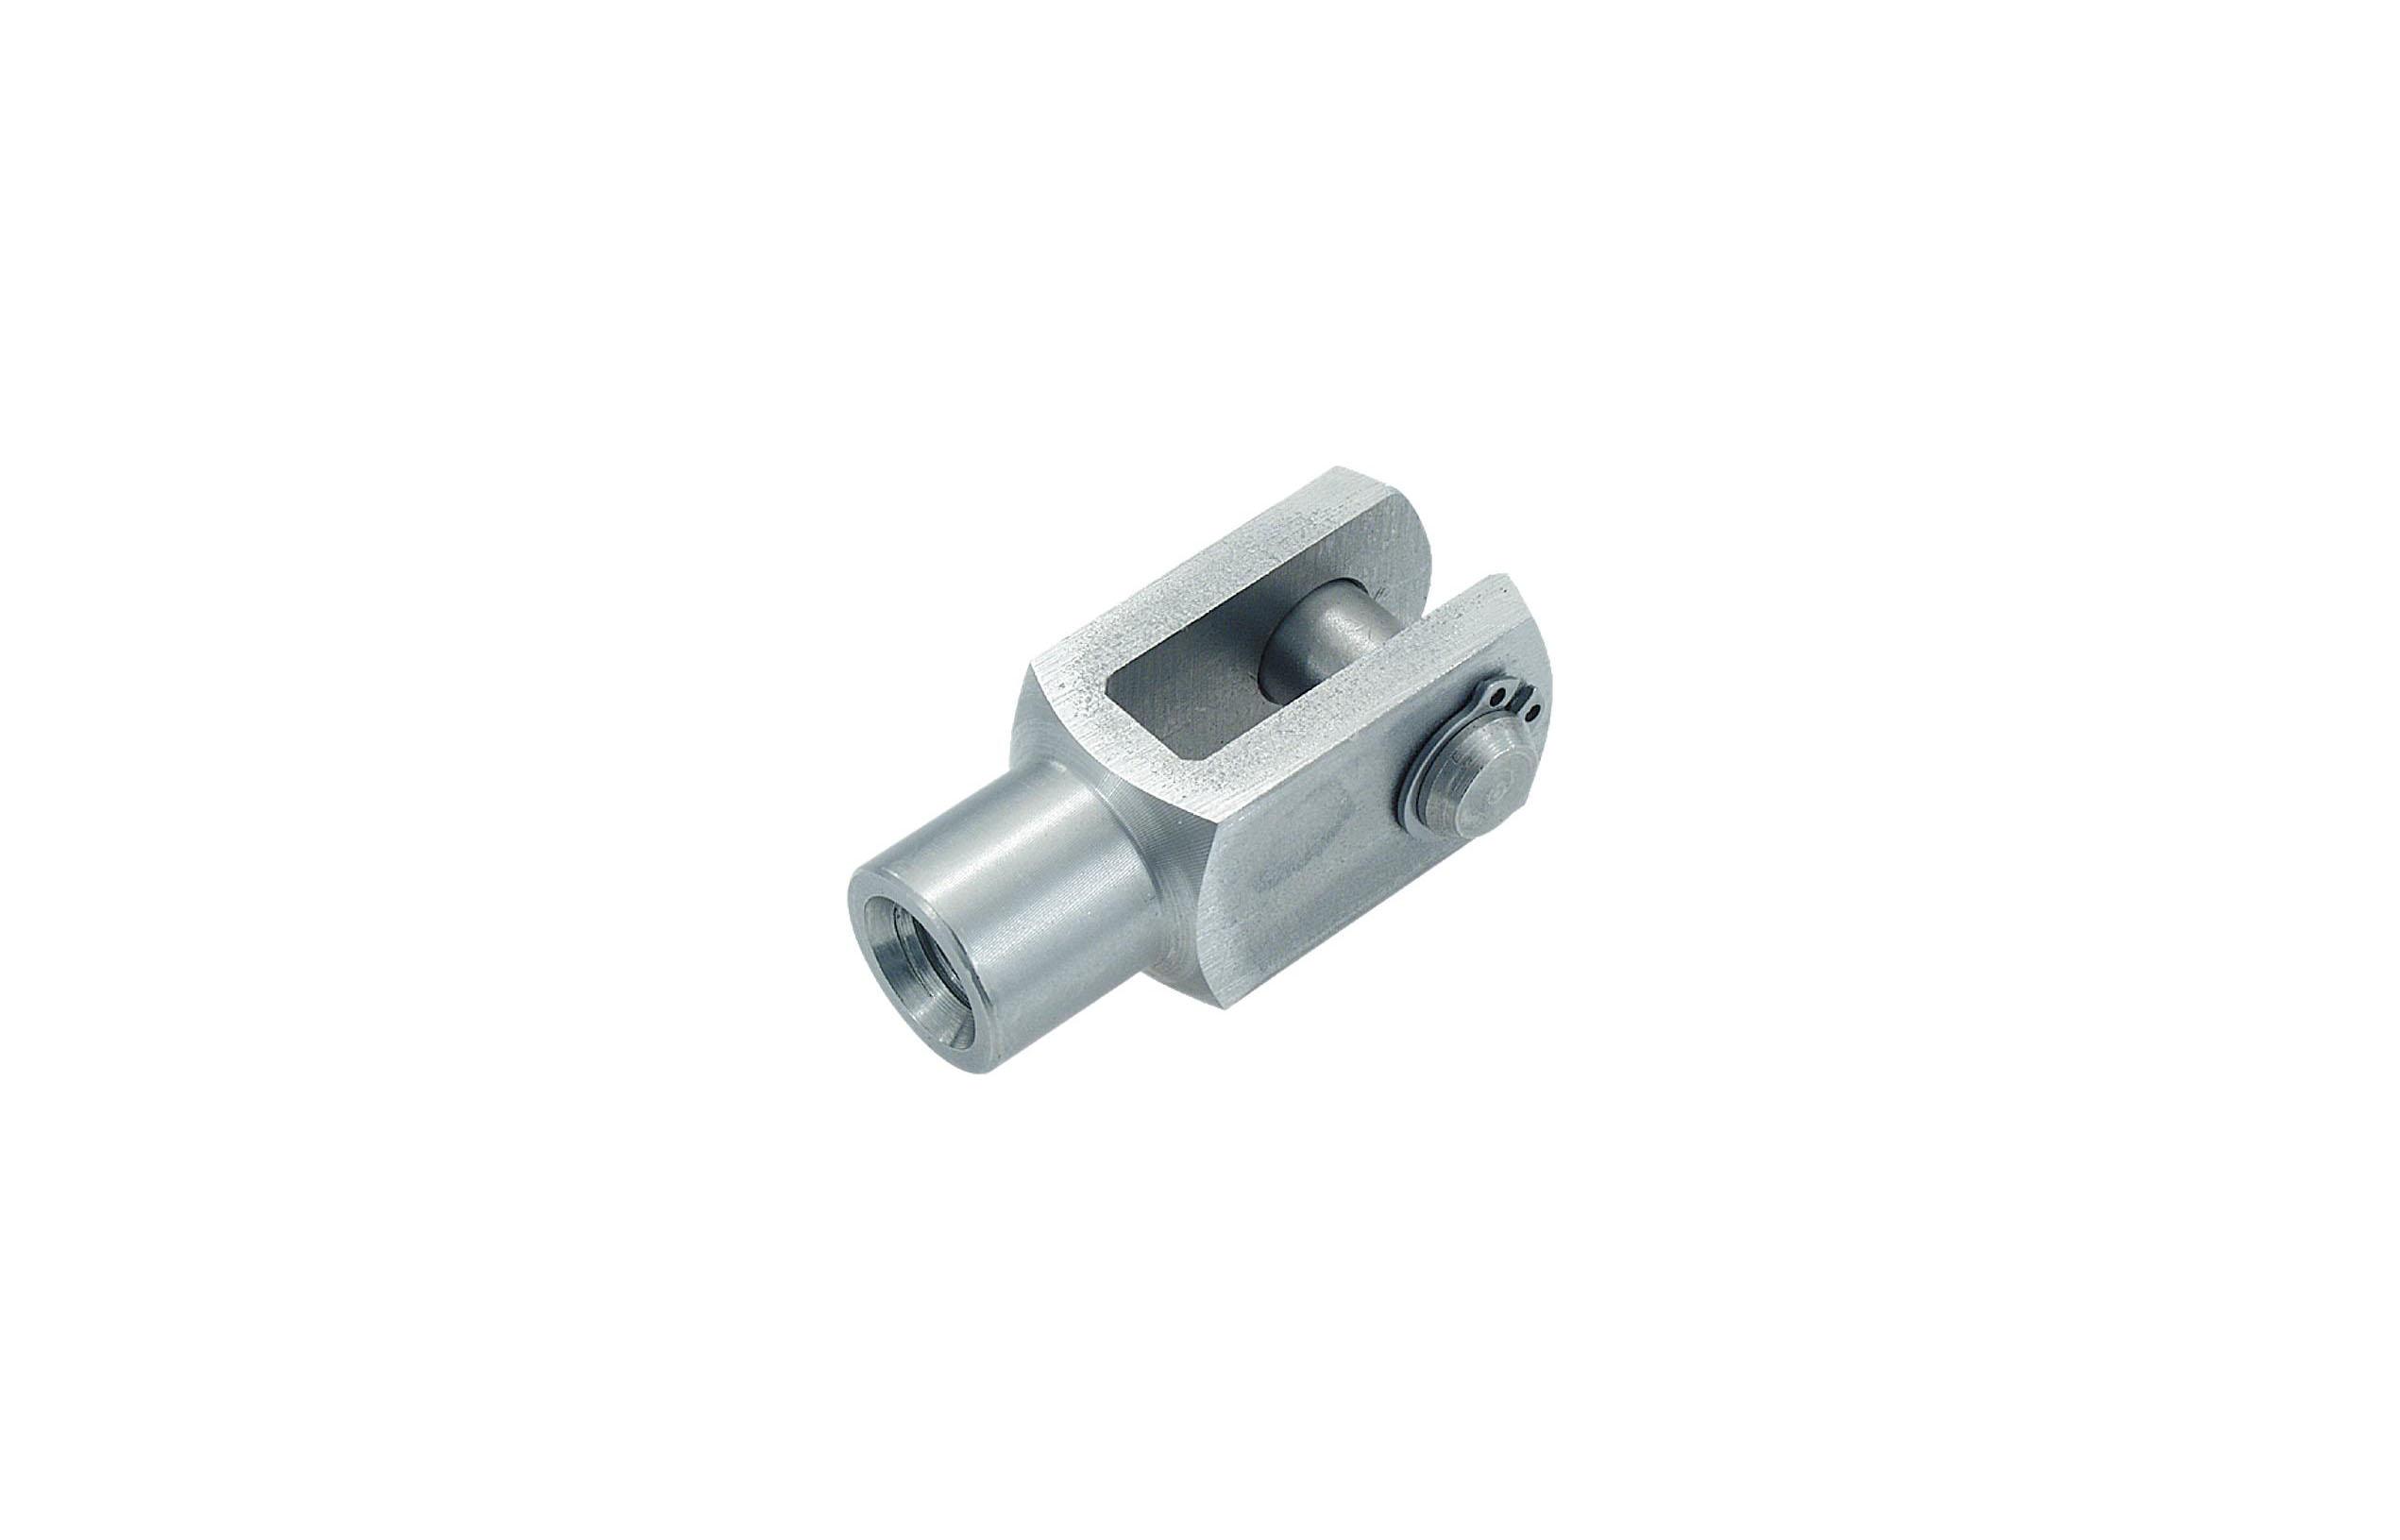 K0732_Clevis joints stainless steel DIN 71752